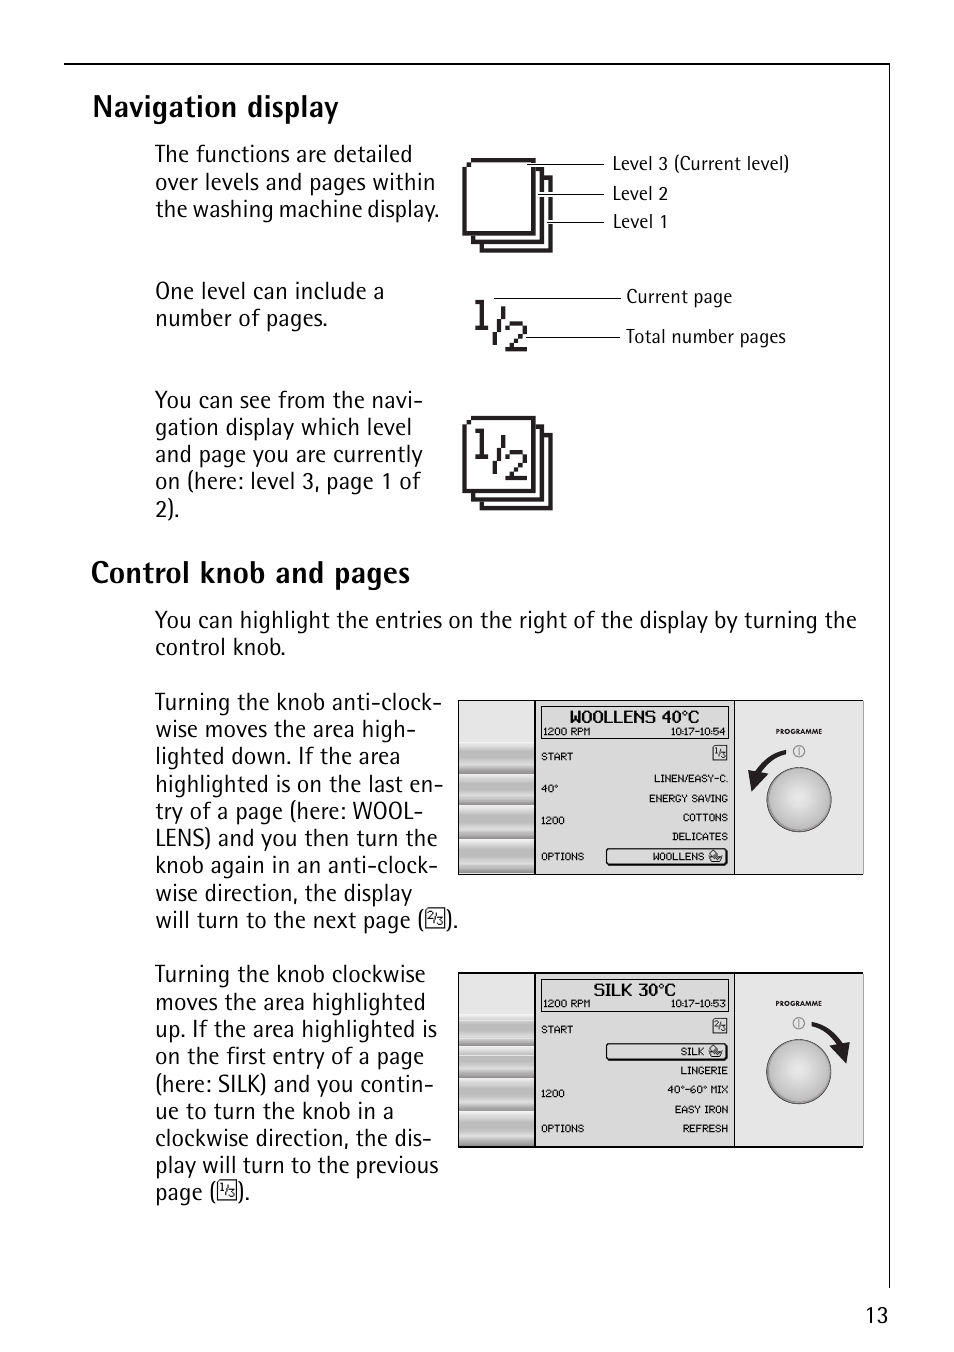 Navigation display, Control knob and pages | AEG LAVALOGIC 1600 User Manual  | Page 13 / 68 | Original mode